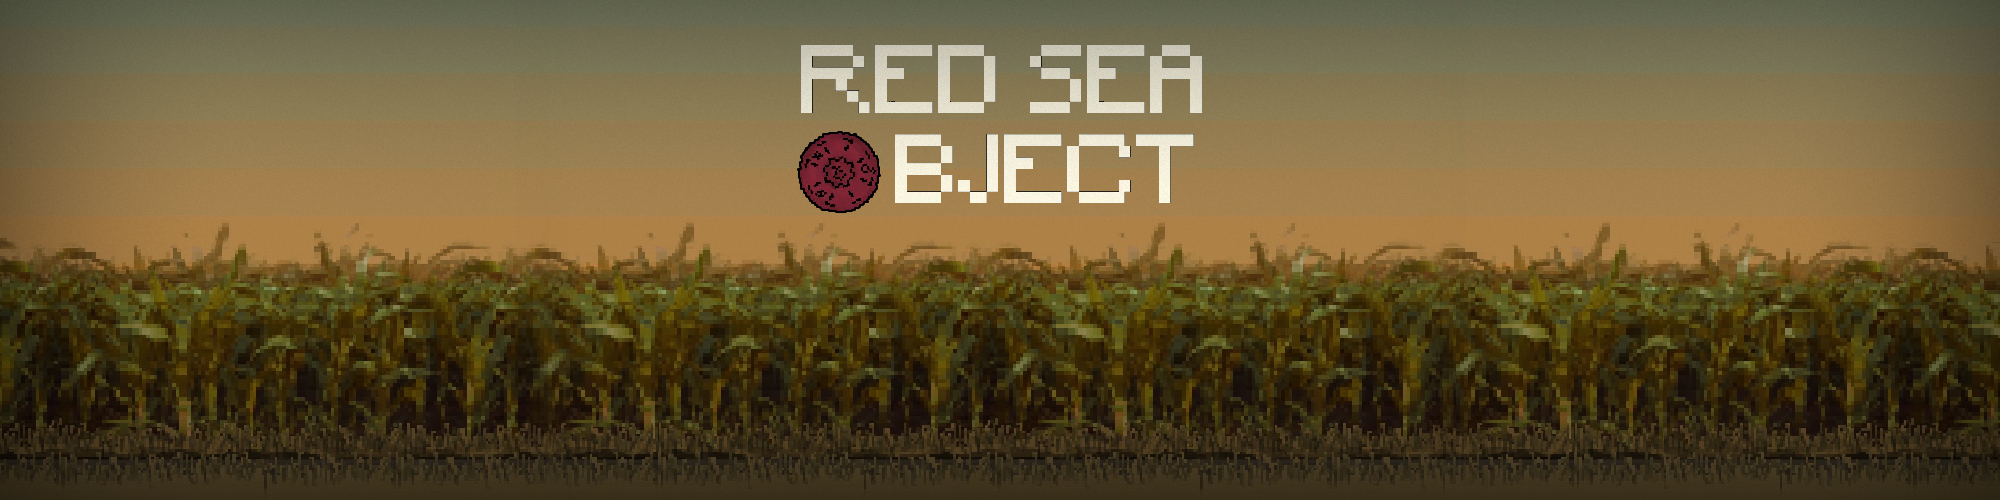 Red Sea Object